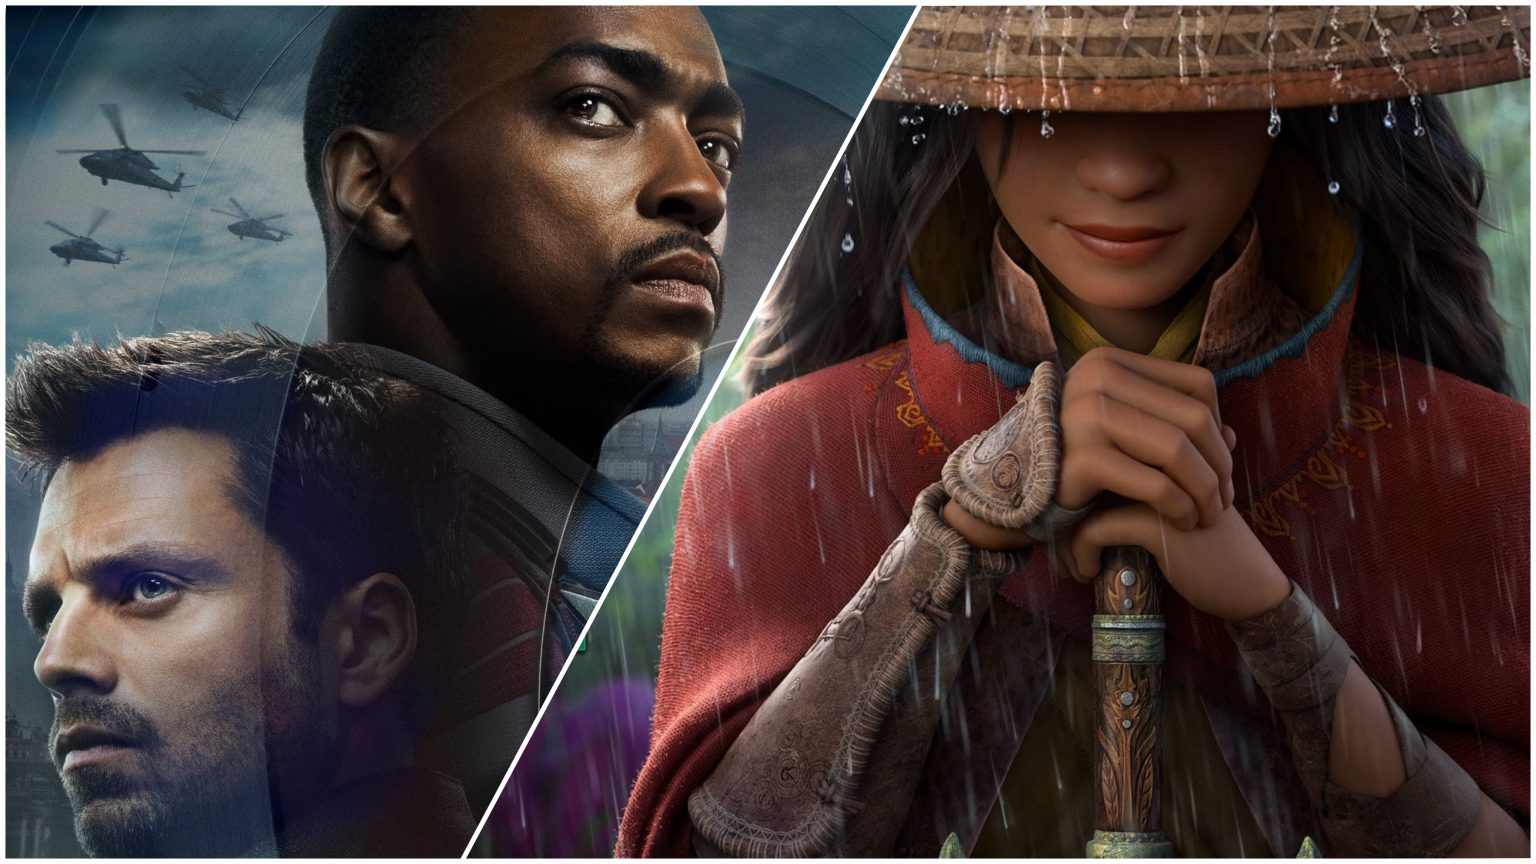 A poster collage of Raya and the Last Dragon and The Falcon and the Winter Solider, both coming to Disney+ in March 2021.